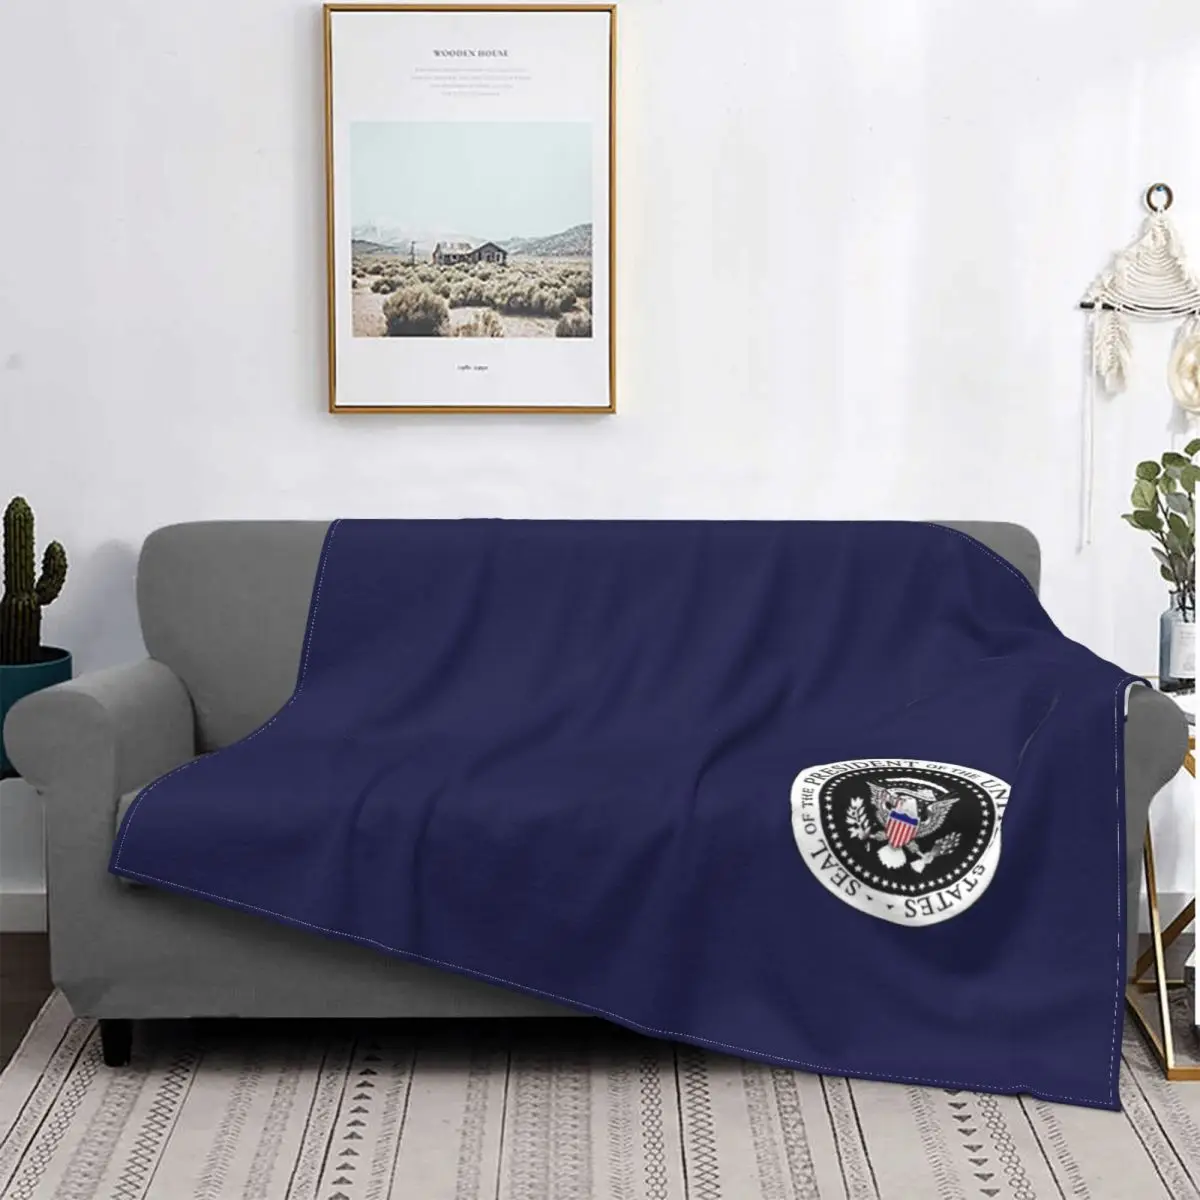 

American Presidential Seal Blankets USA Trump Election Vote Flannel Awesome Warm Throw Blanket for Home All Season